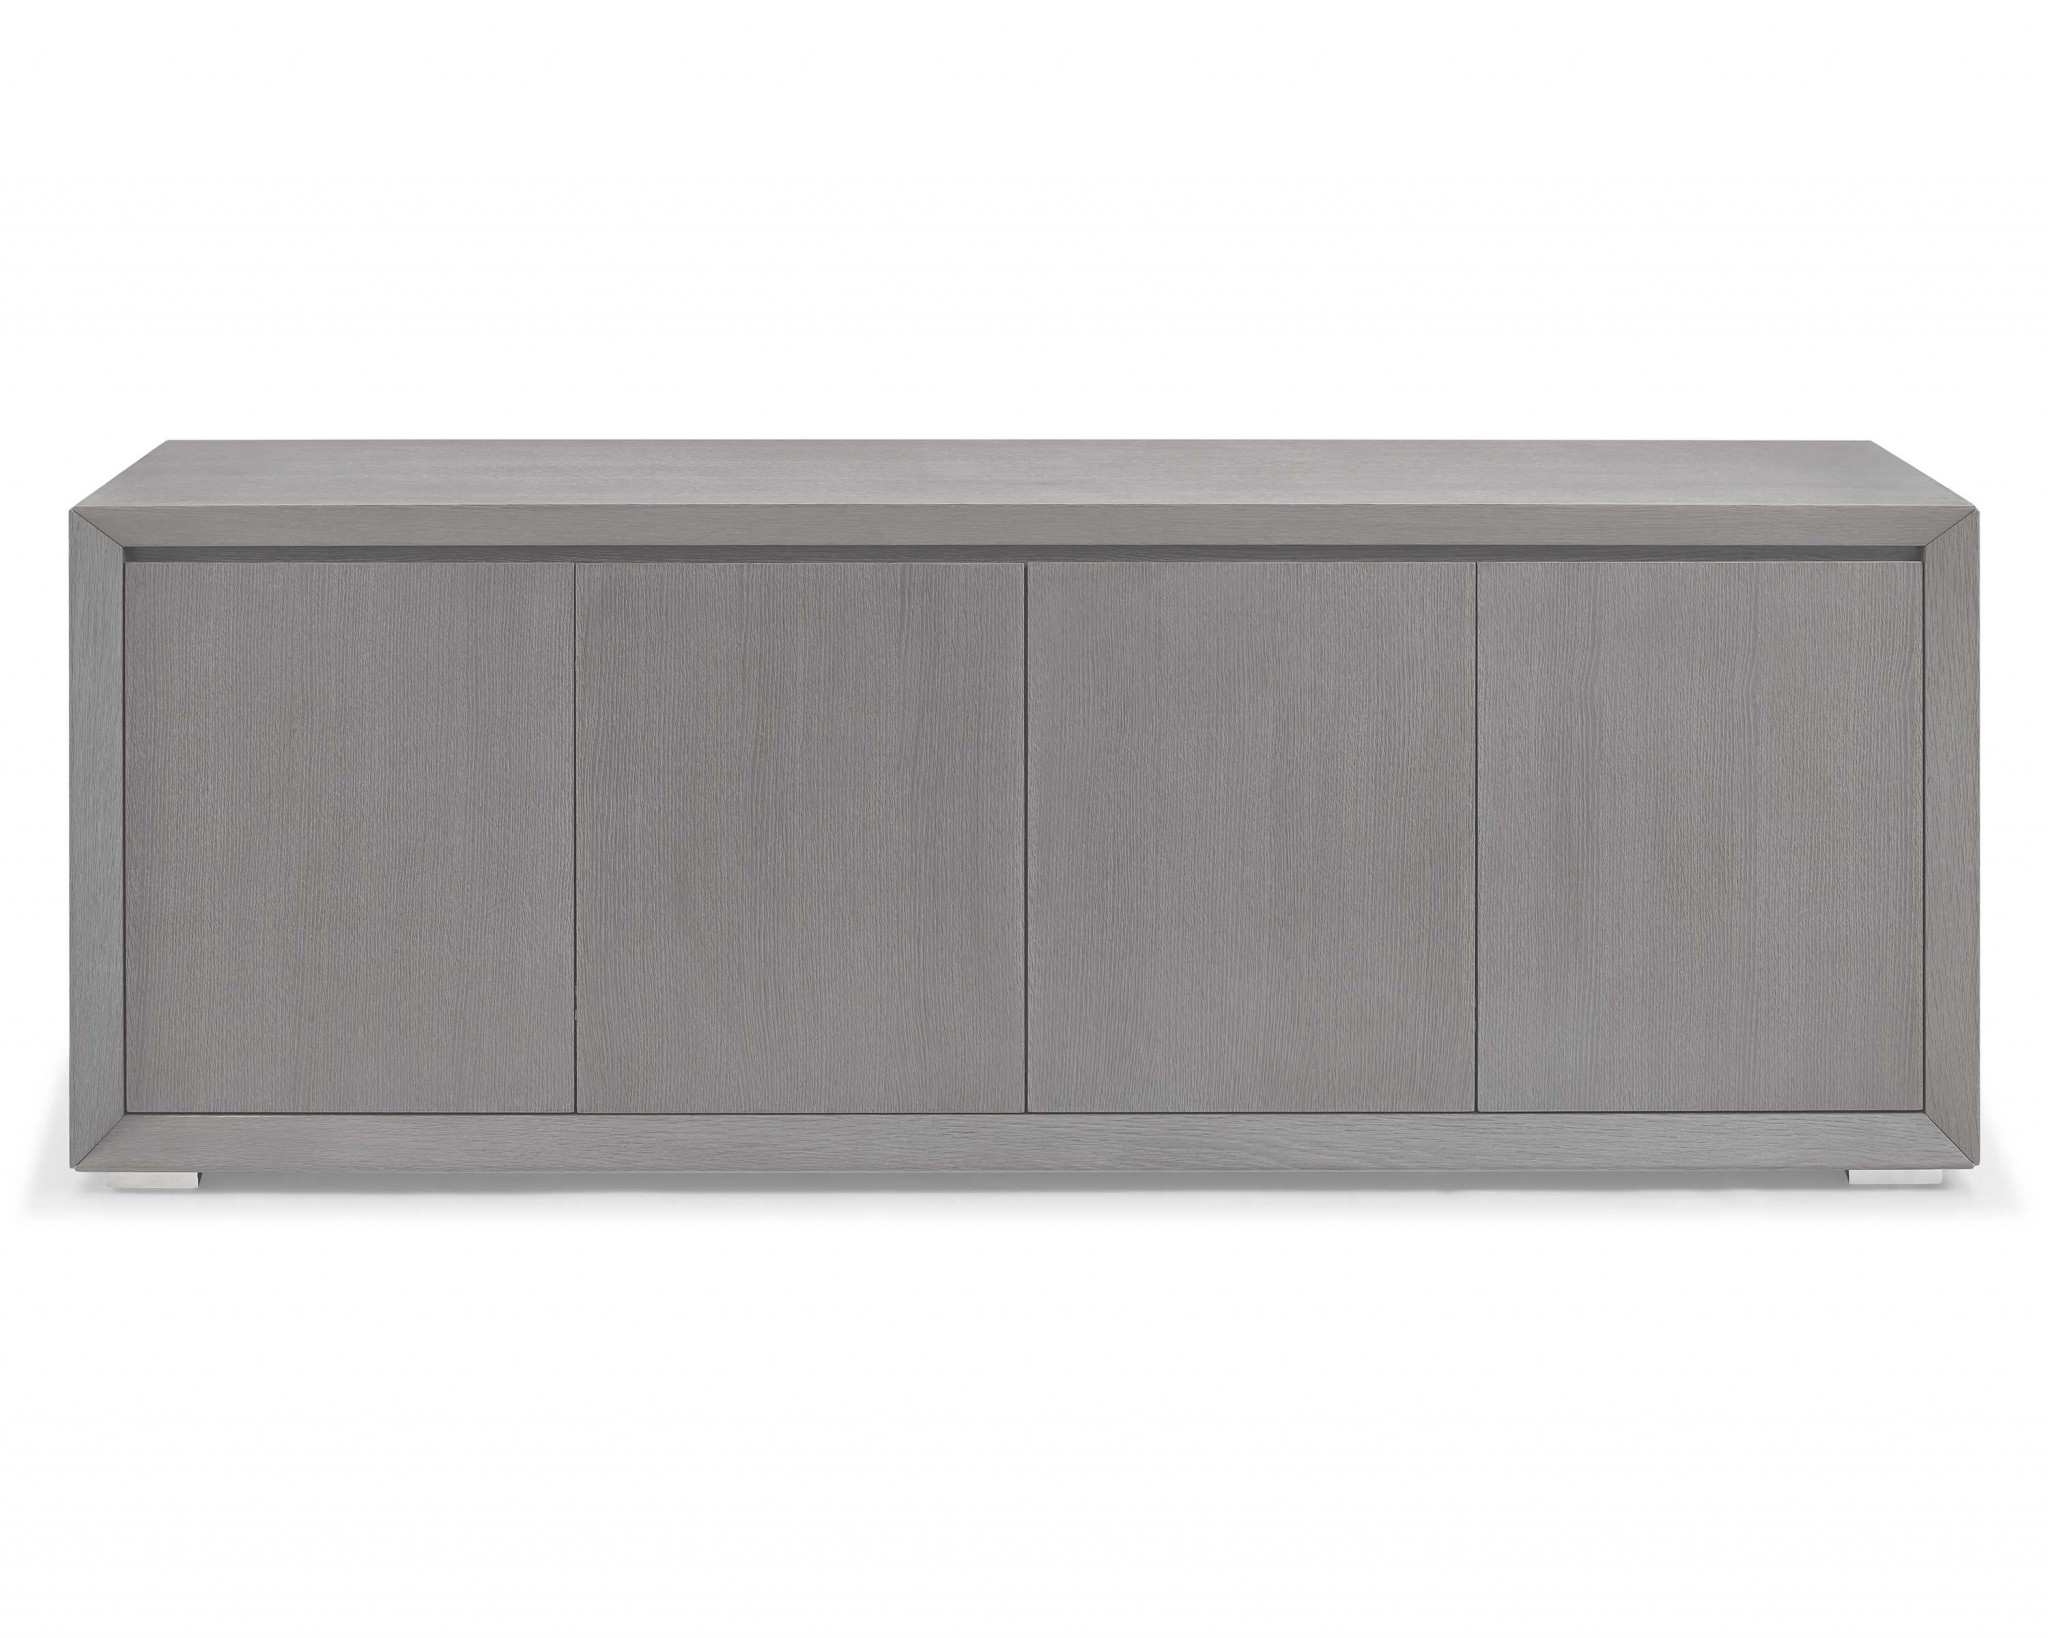 80" X 19.5" X 32" White Stainless Steel Buffet